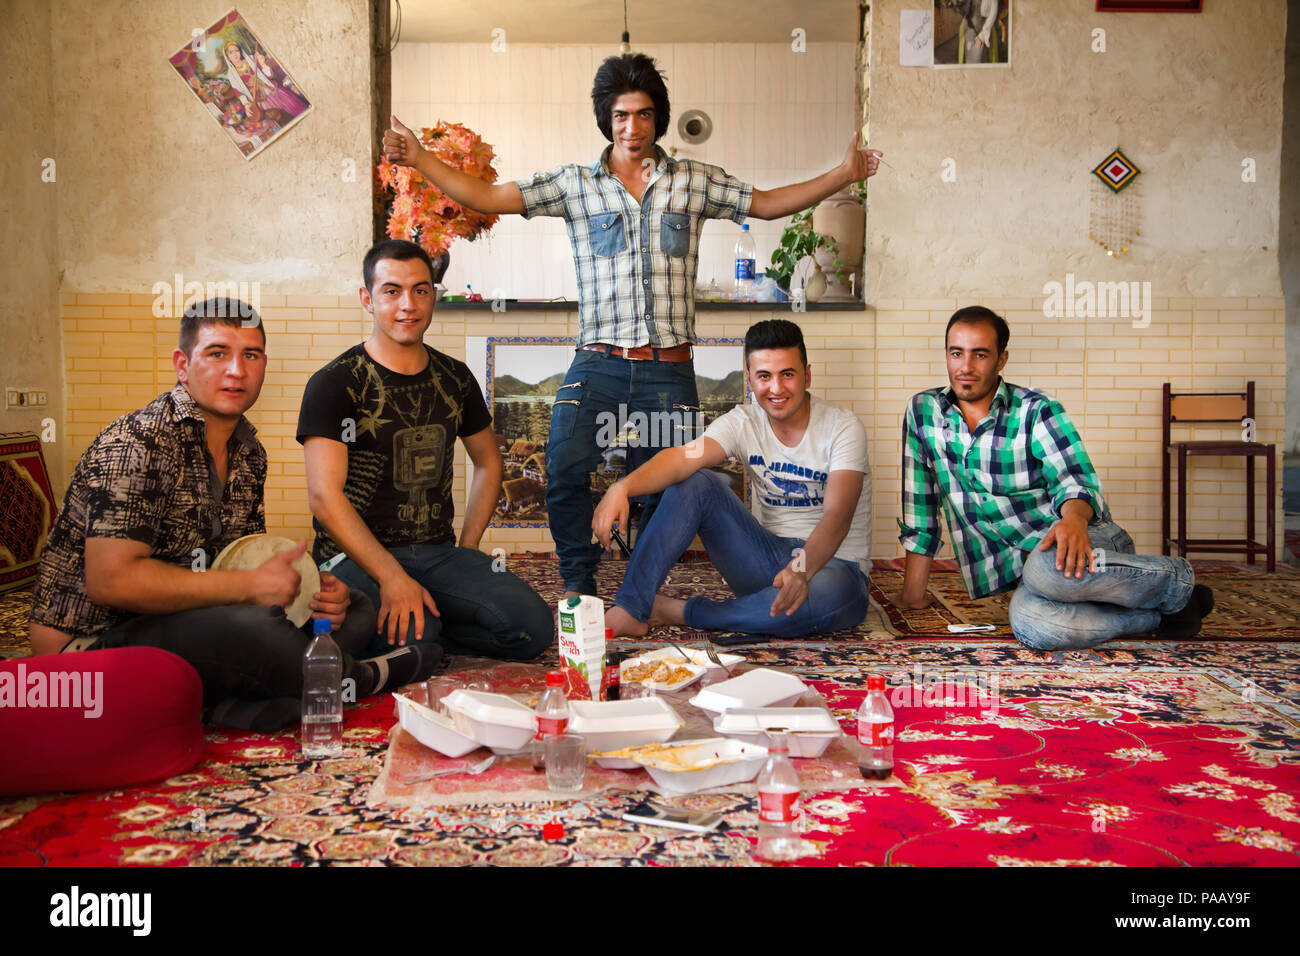 Qashqai young guys living in a city with modern fashion clothes, nomad people, Iran Stock Photo